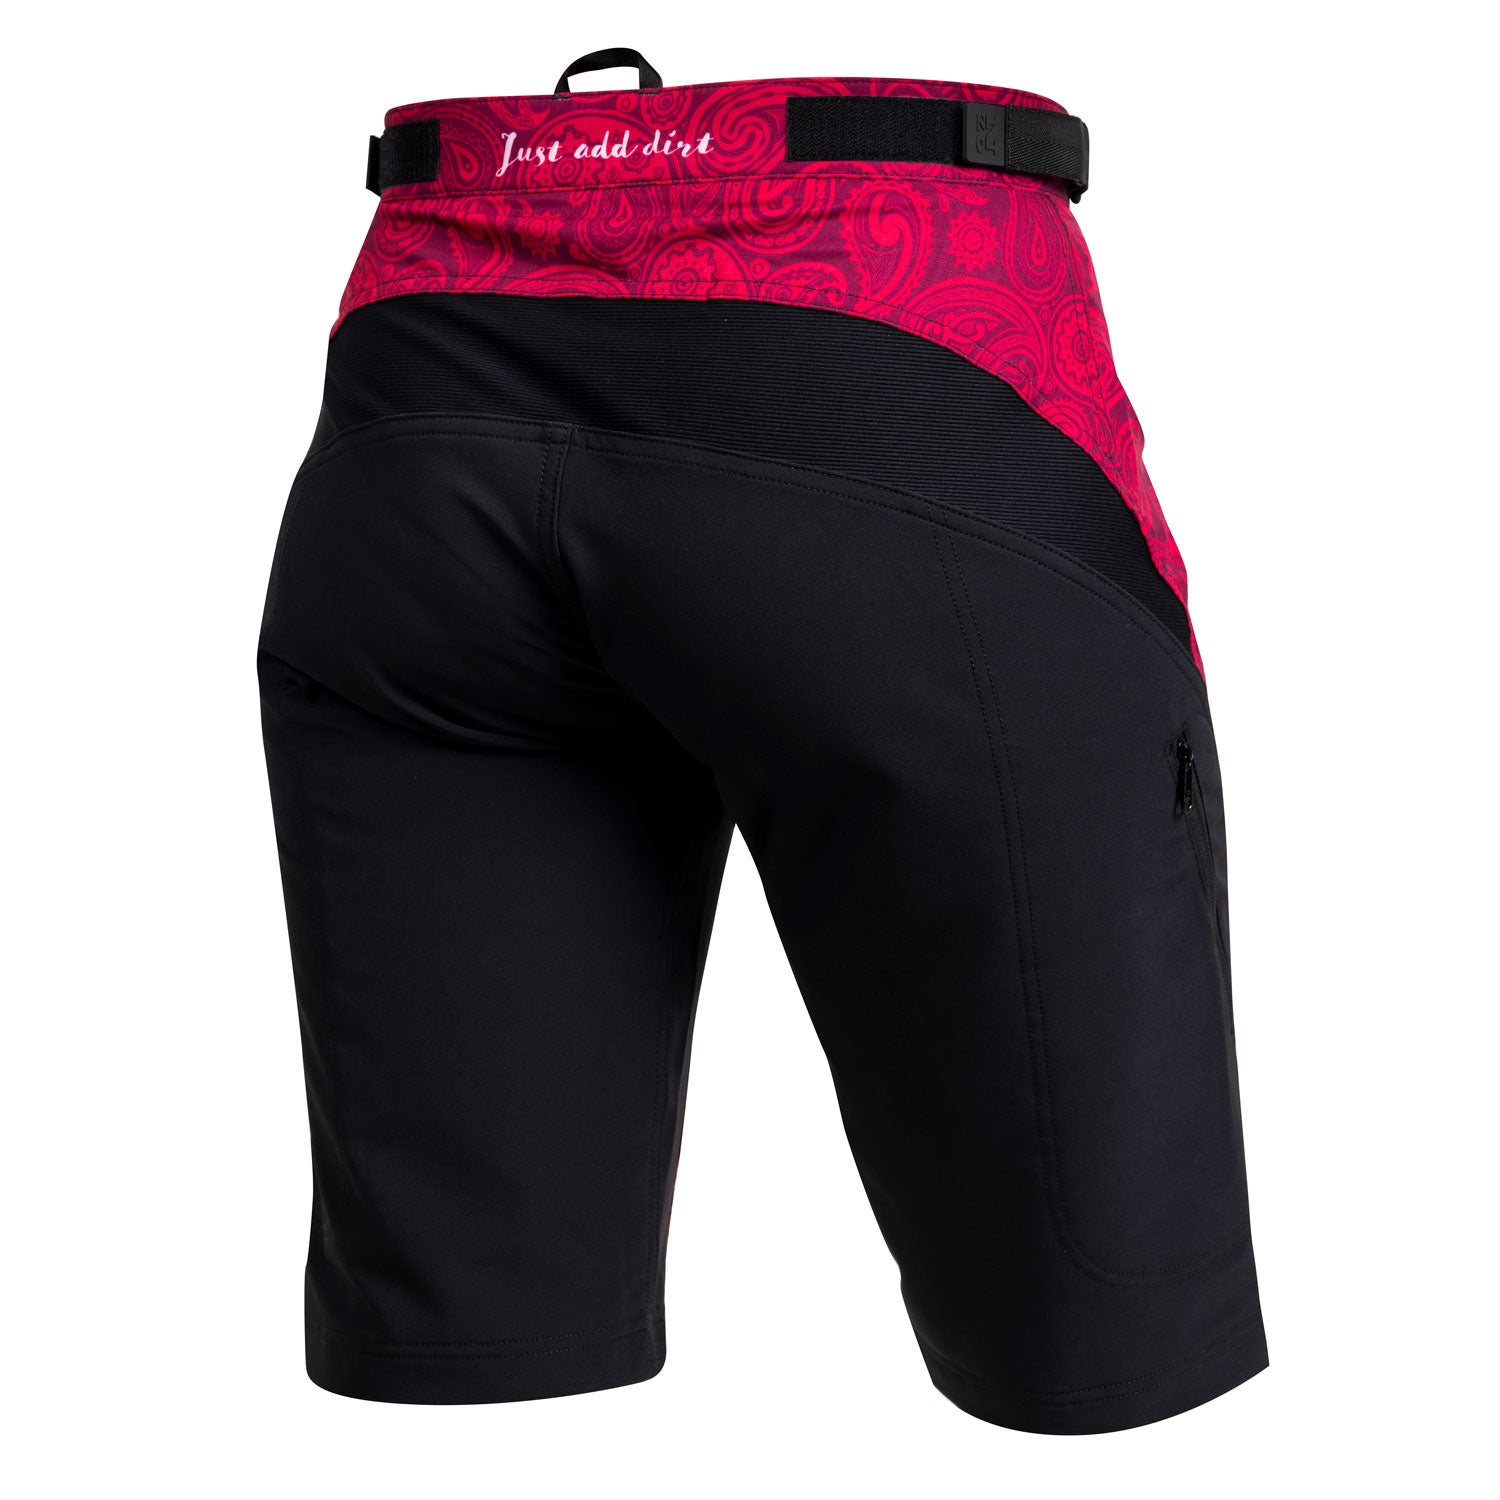 Riddler - Womens Trail Shorts - Limited Edition 06 Red/Black